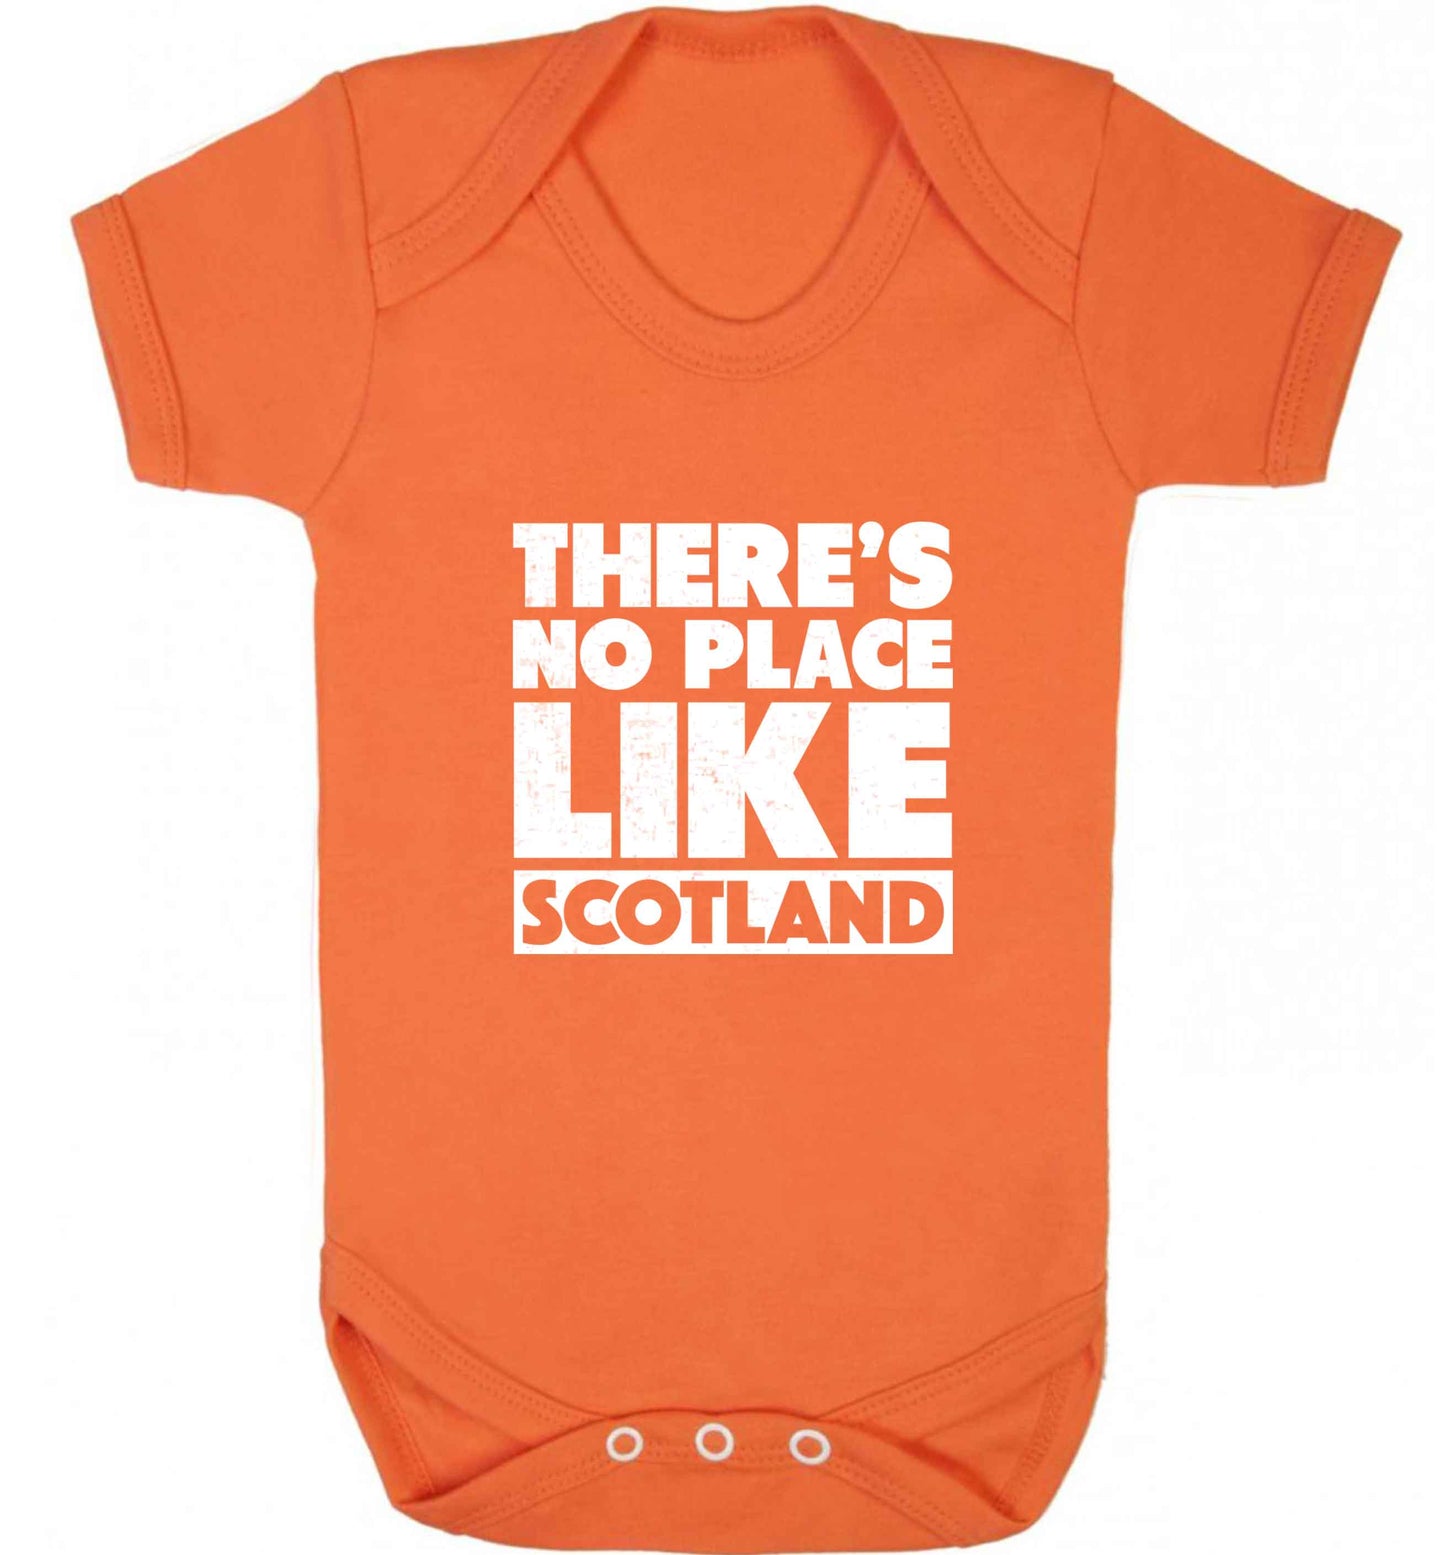 There's no place like Scotland baby vest orange 18-24 months